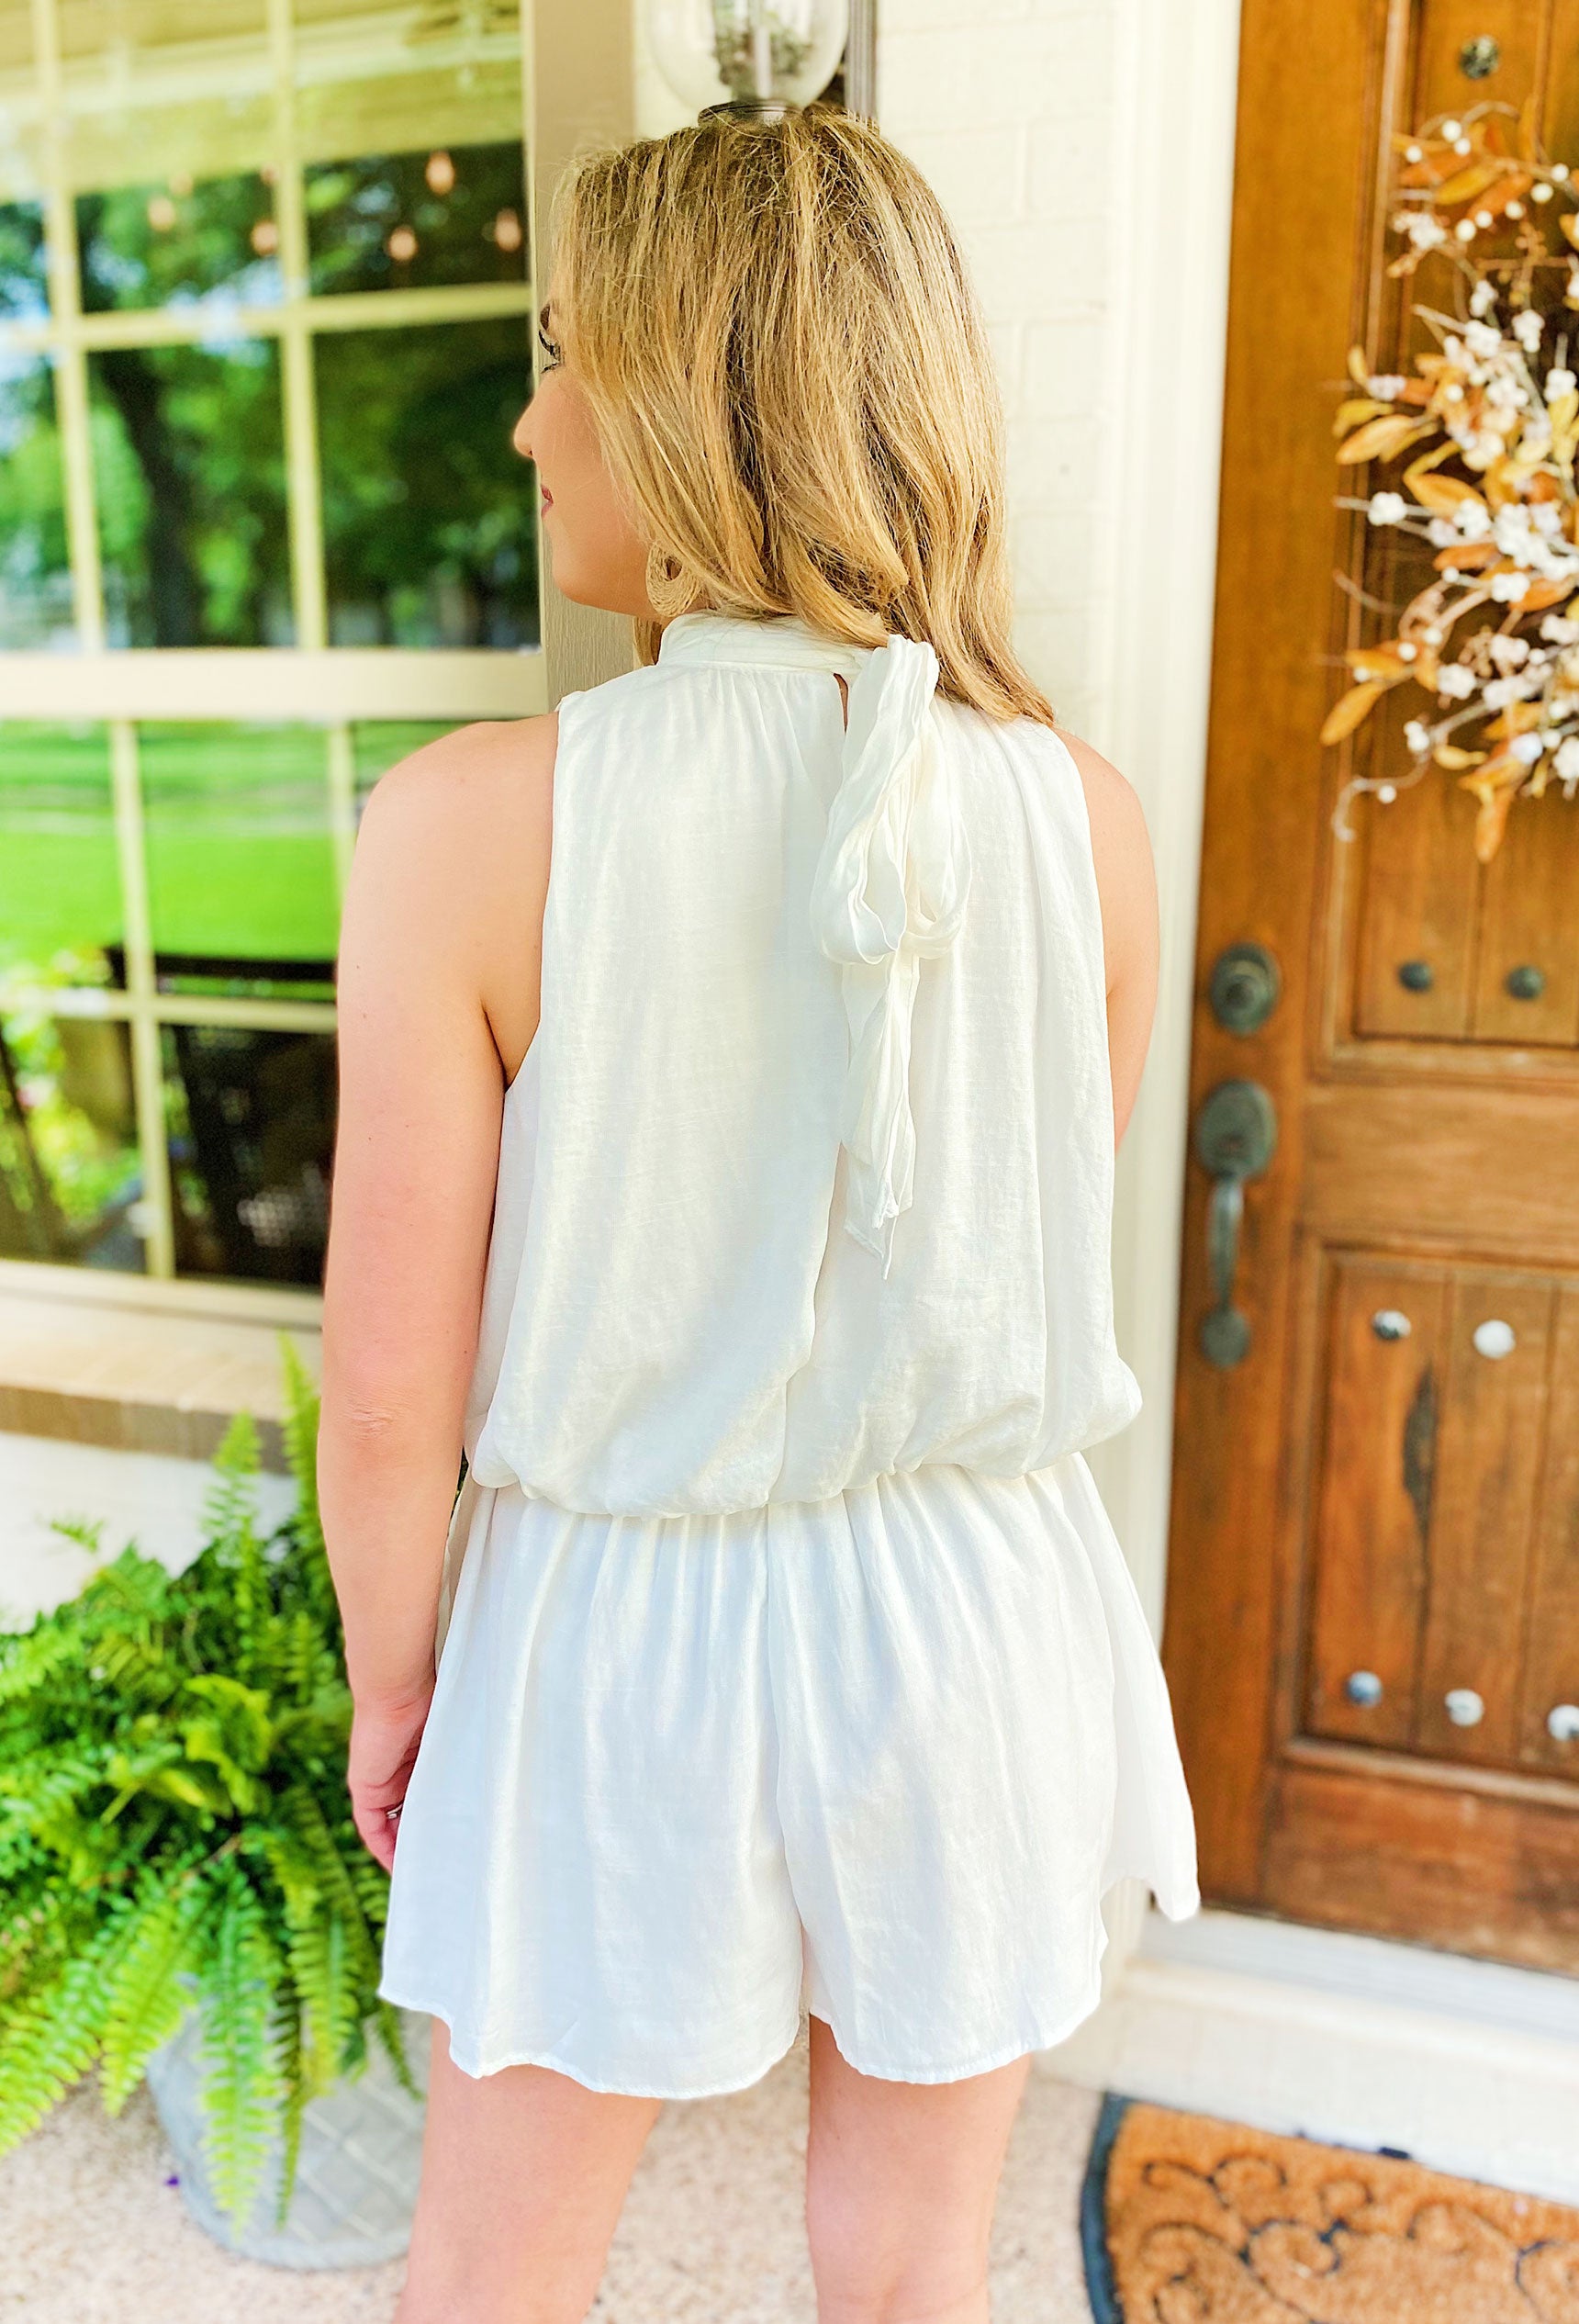 In Your Dreams Romper, white halter top and an alluring open back, White romper with a neutral acrylic chain detail across the front and an open back